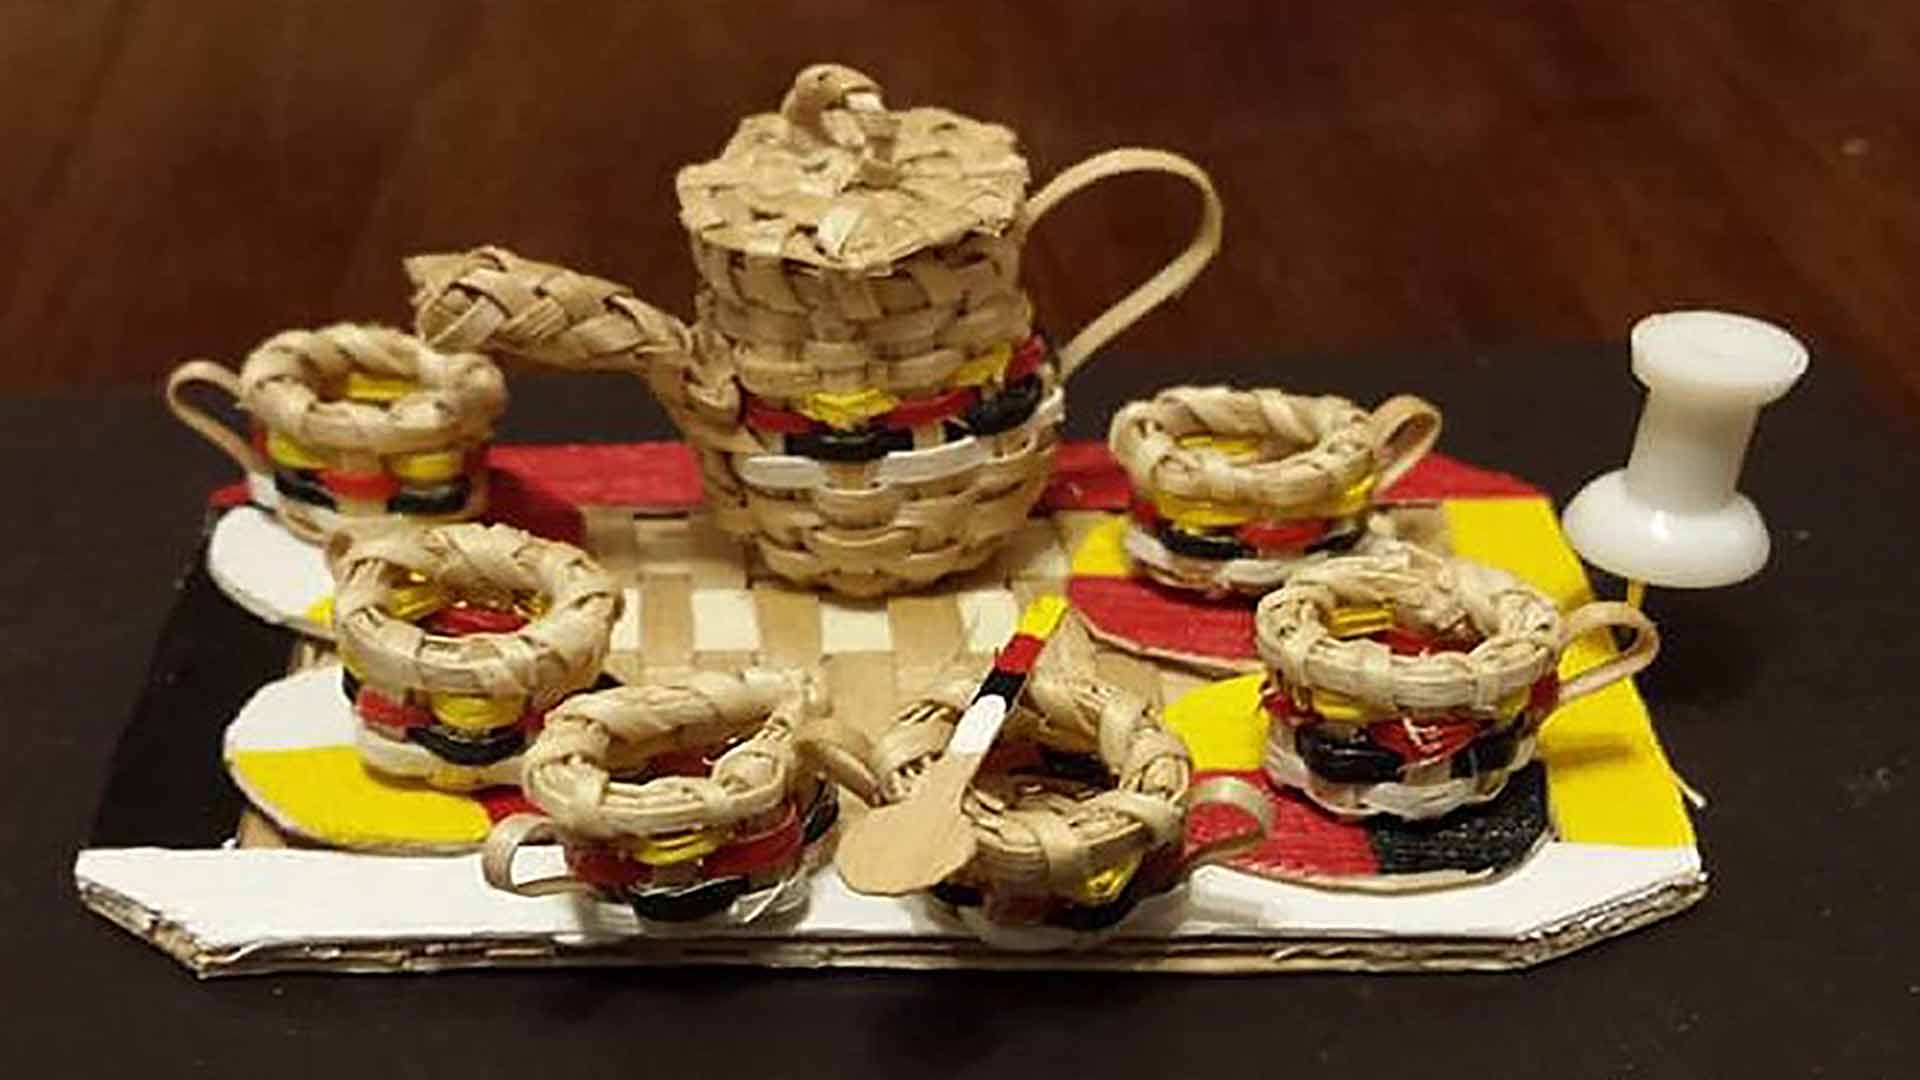 A set of six teacups, each smaller than a pushpin, and a miniature teapot, all woven from wood strips.